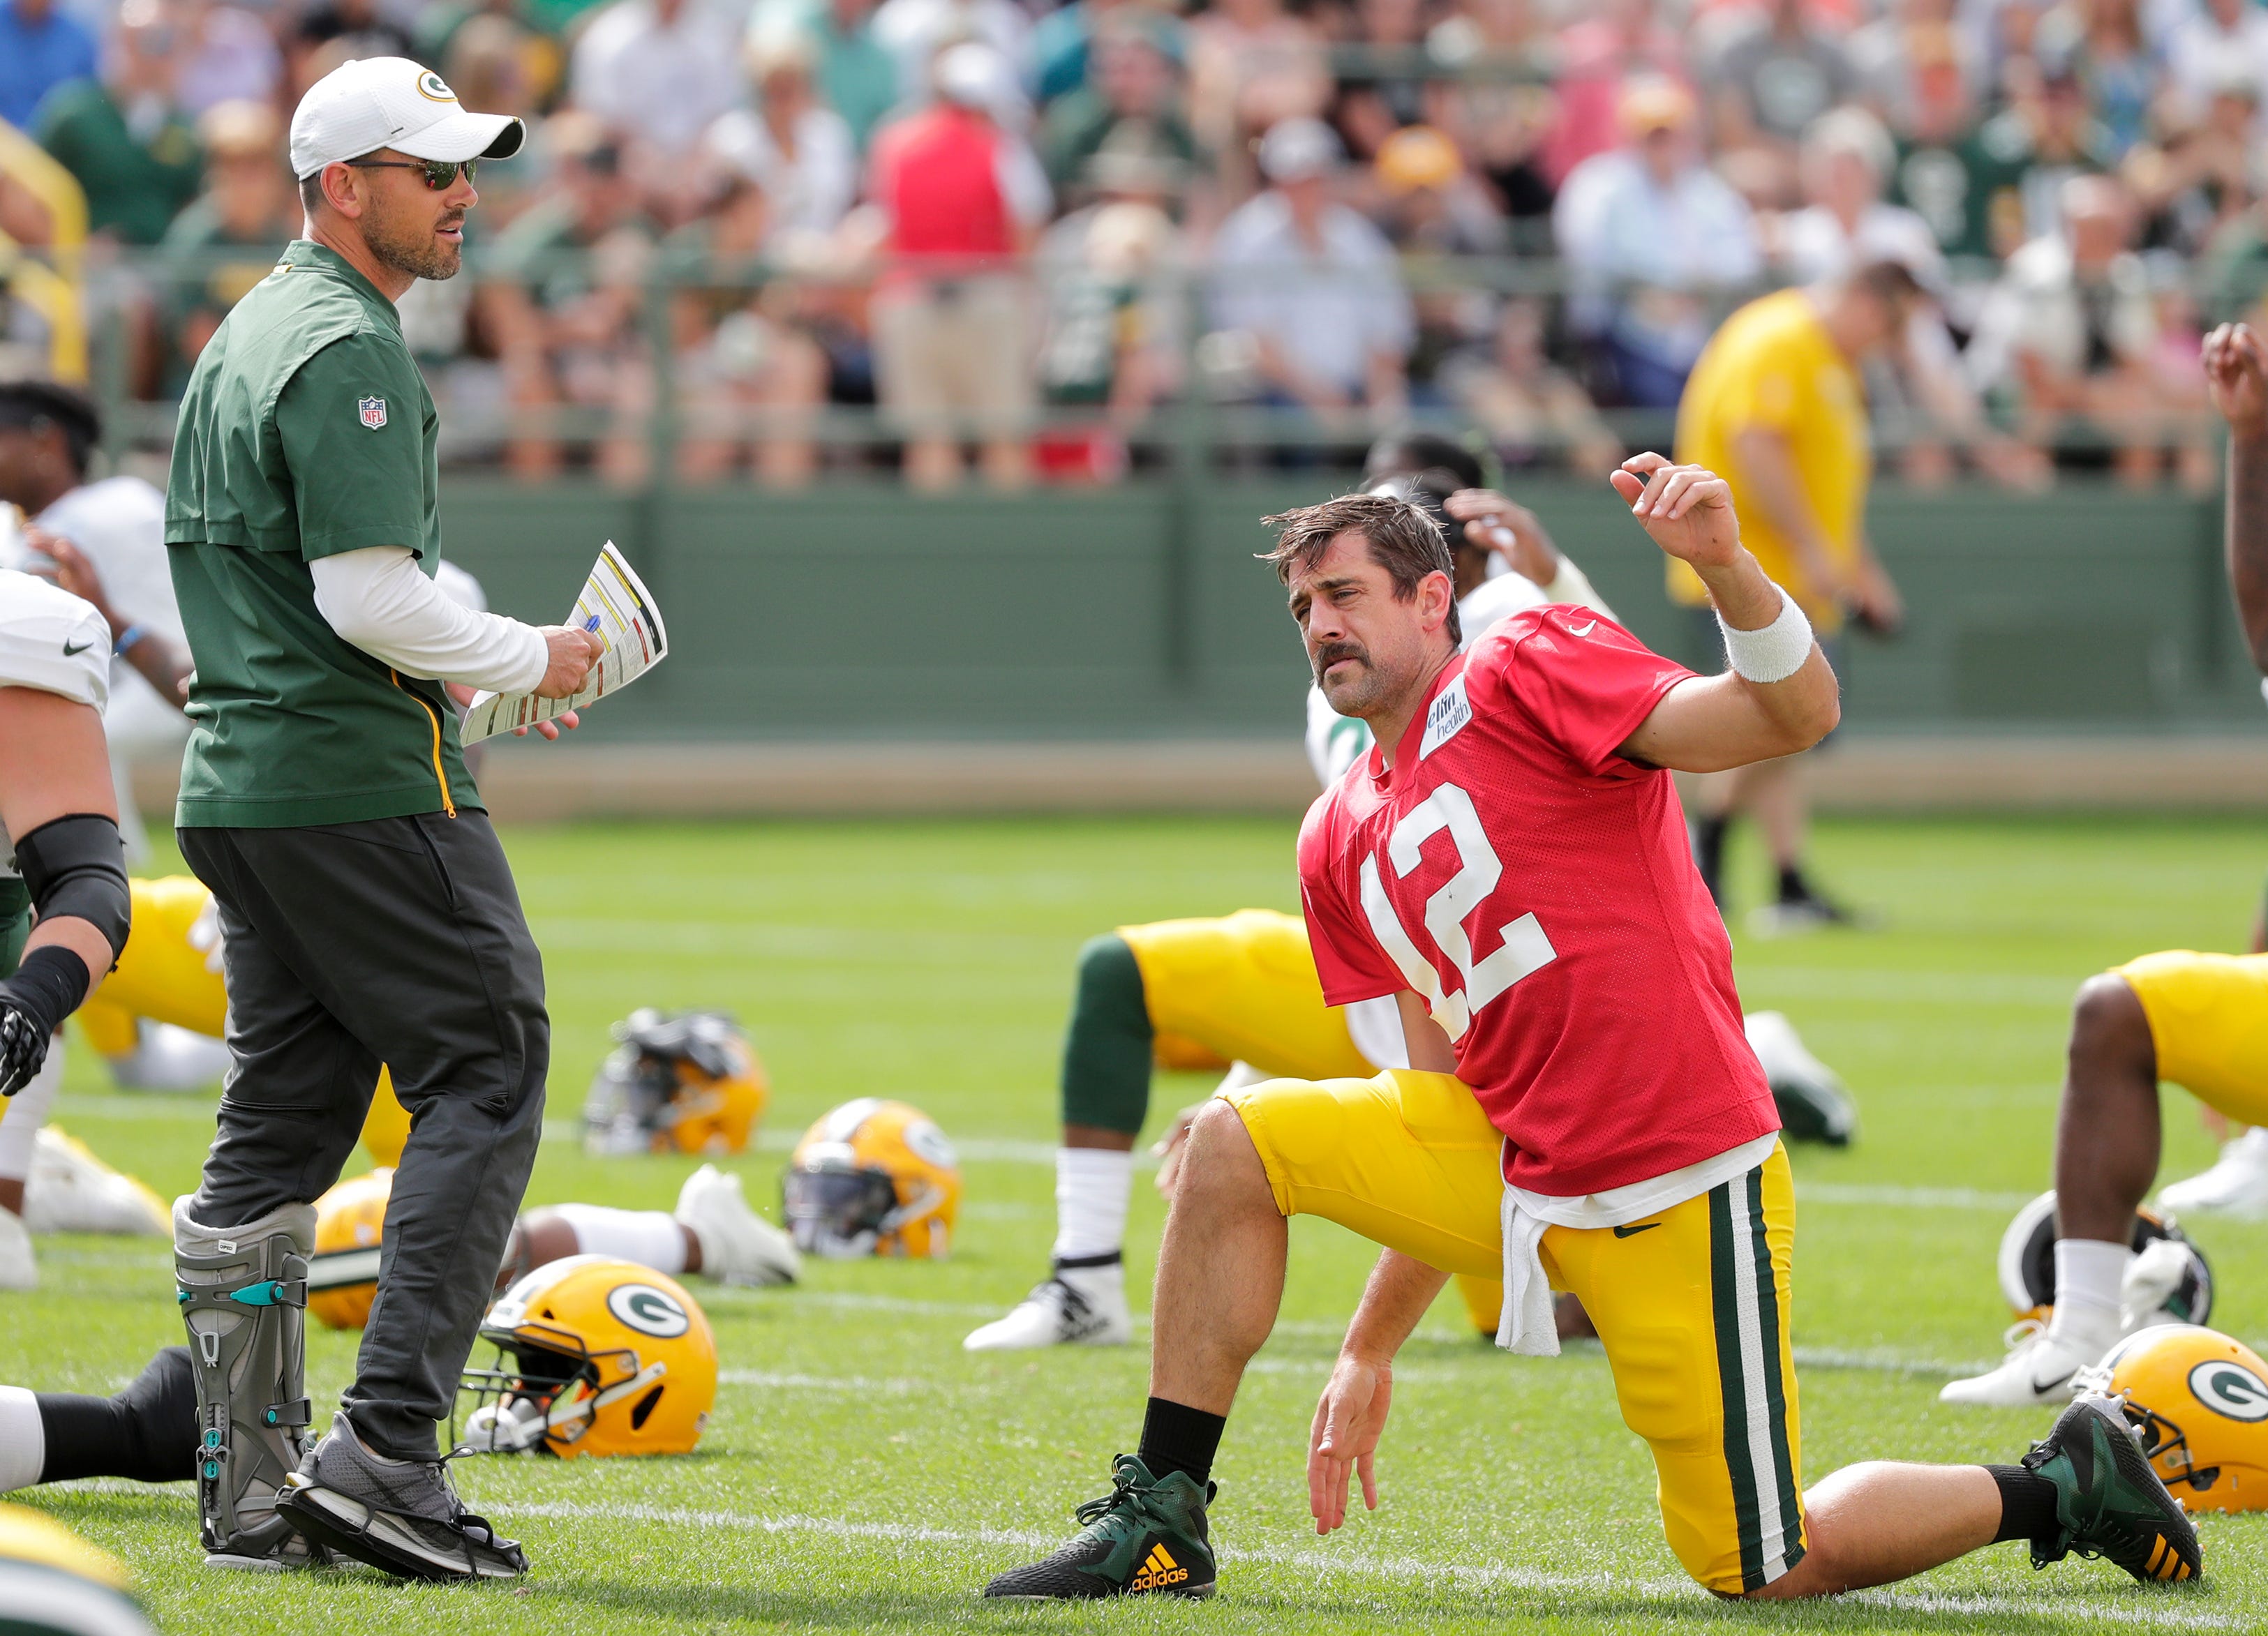 Green Bay Packers' head coach Matt LaFleur talks to Aaron Rodgers as he stretches during training camp practice Tuesday, August 13, 2019, at Ray Nitschke Field in Ashwaubenon, Wis.